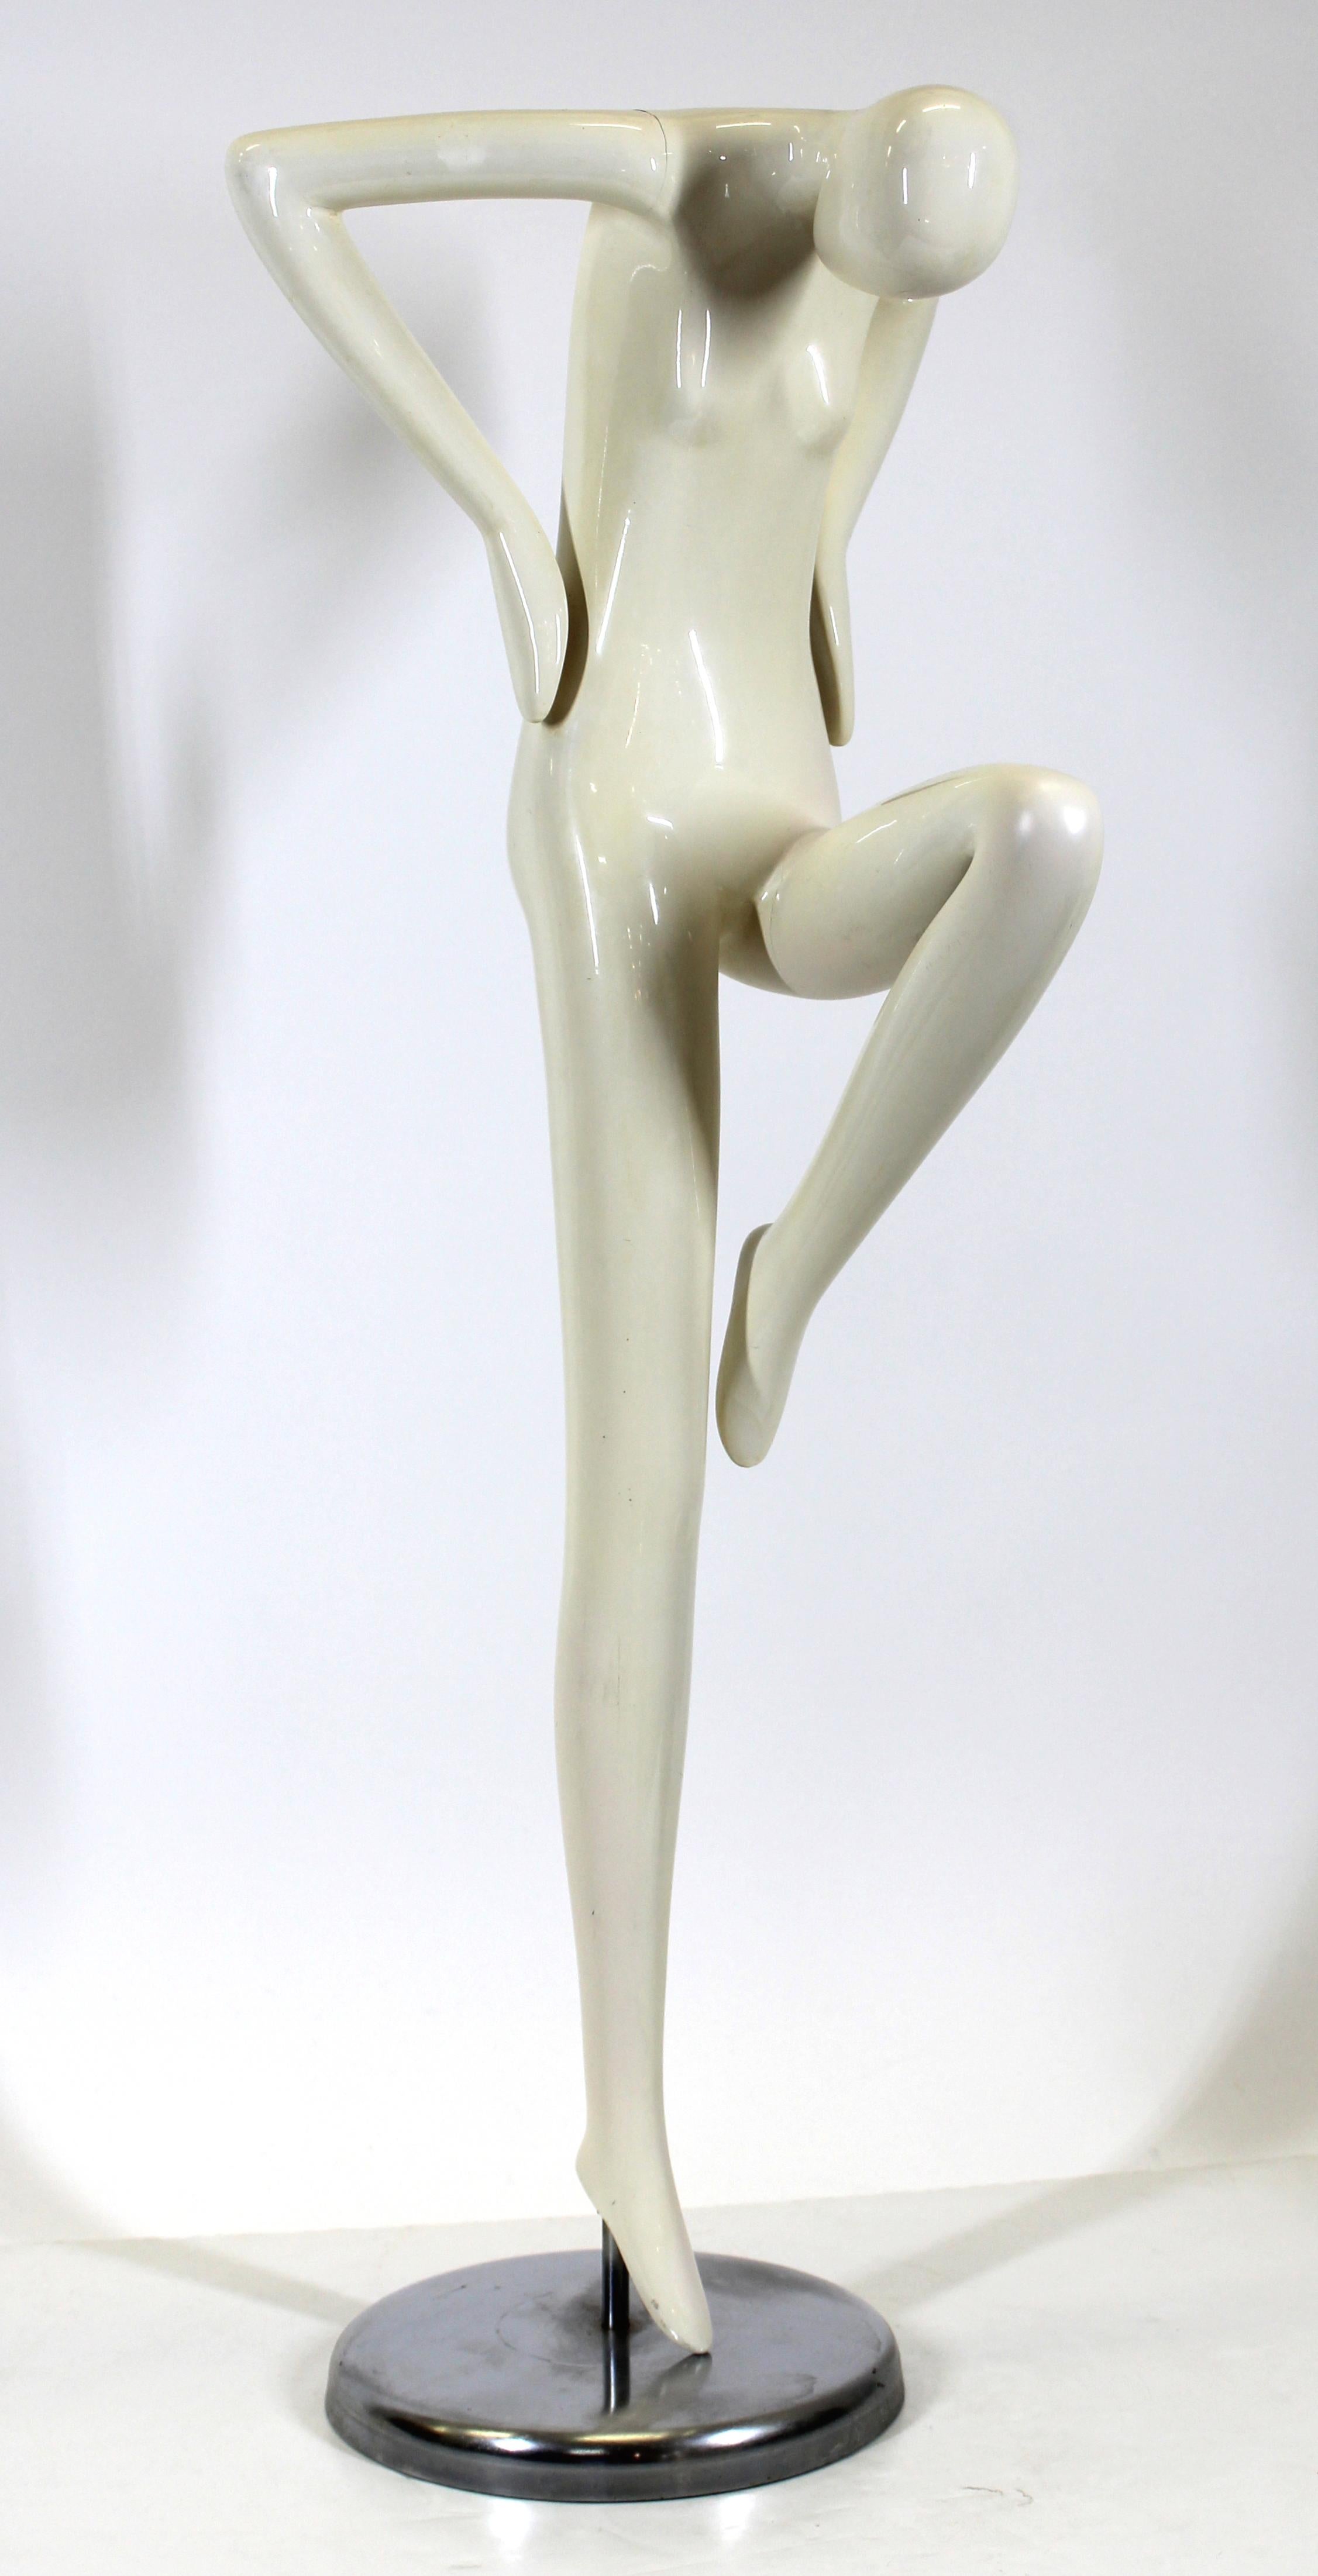 Modern stylized figure of a woman in standing pose, mounted on a metal base, circa late 1970's.